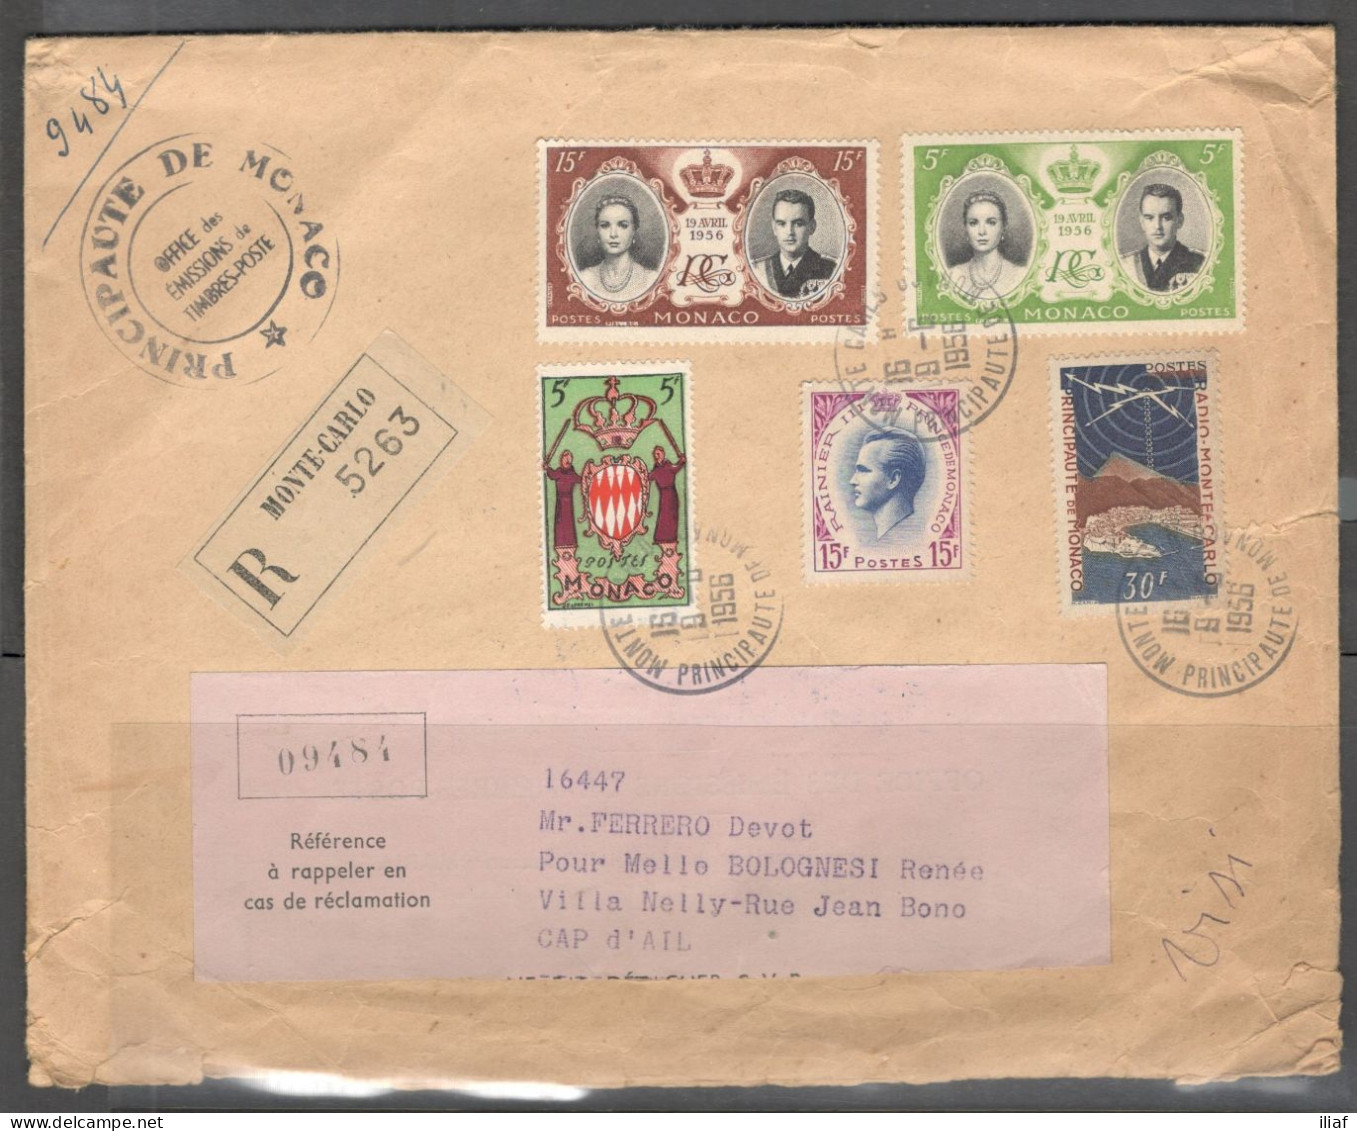 Monaco. Stamps Sc. 280, 318, 337, 369-370 On Registered Letter, Sent From Monte-Carlo, Monaco On 9.06.1956 To Cap-d'Ail - Lettres & Documents